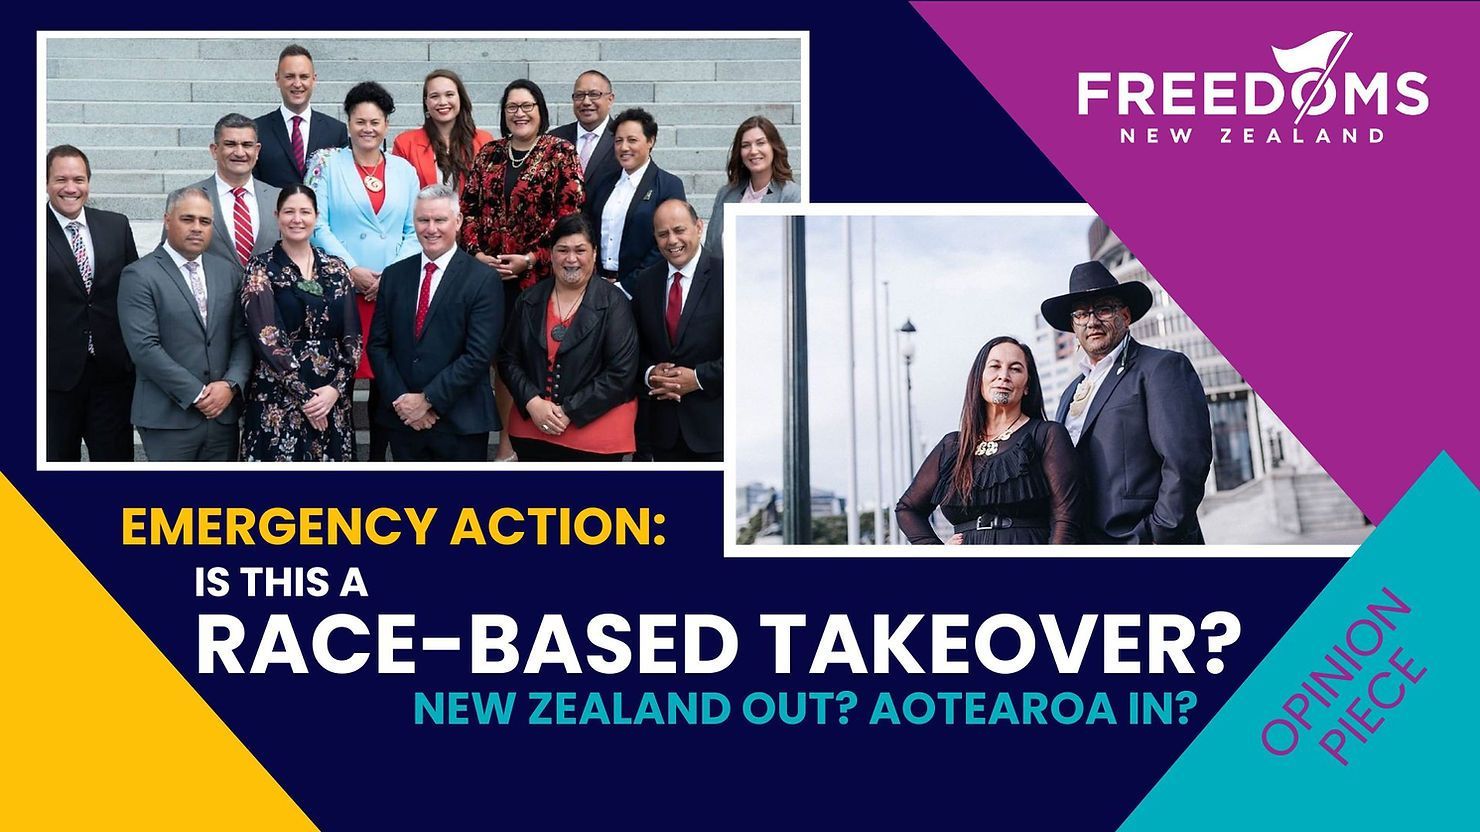 Emergency Action: Is this a race-based takeover? New Zealand Out? Aotearoa In?